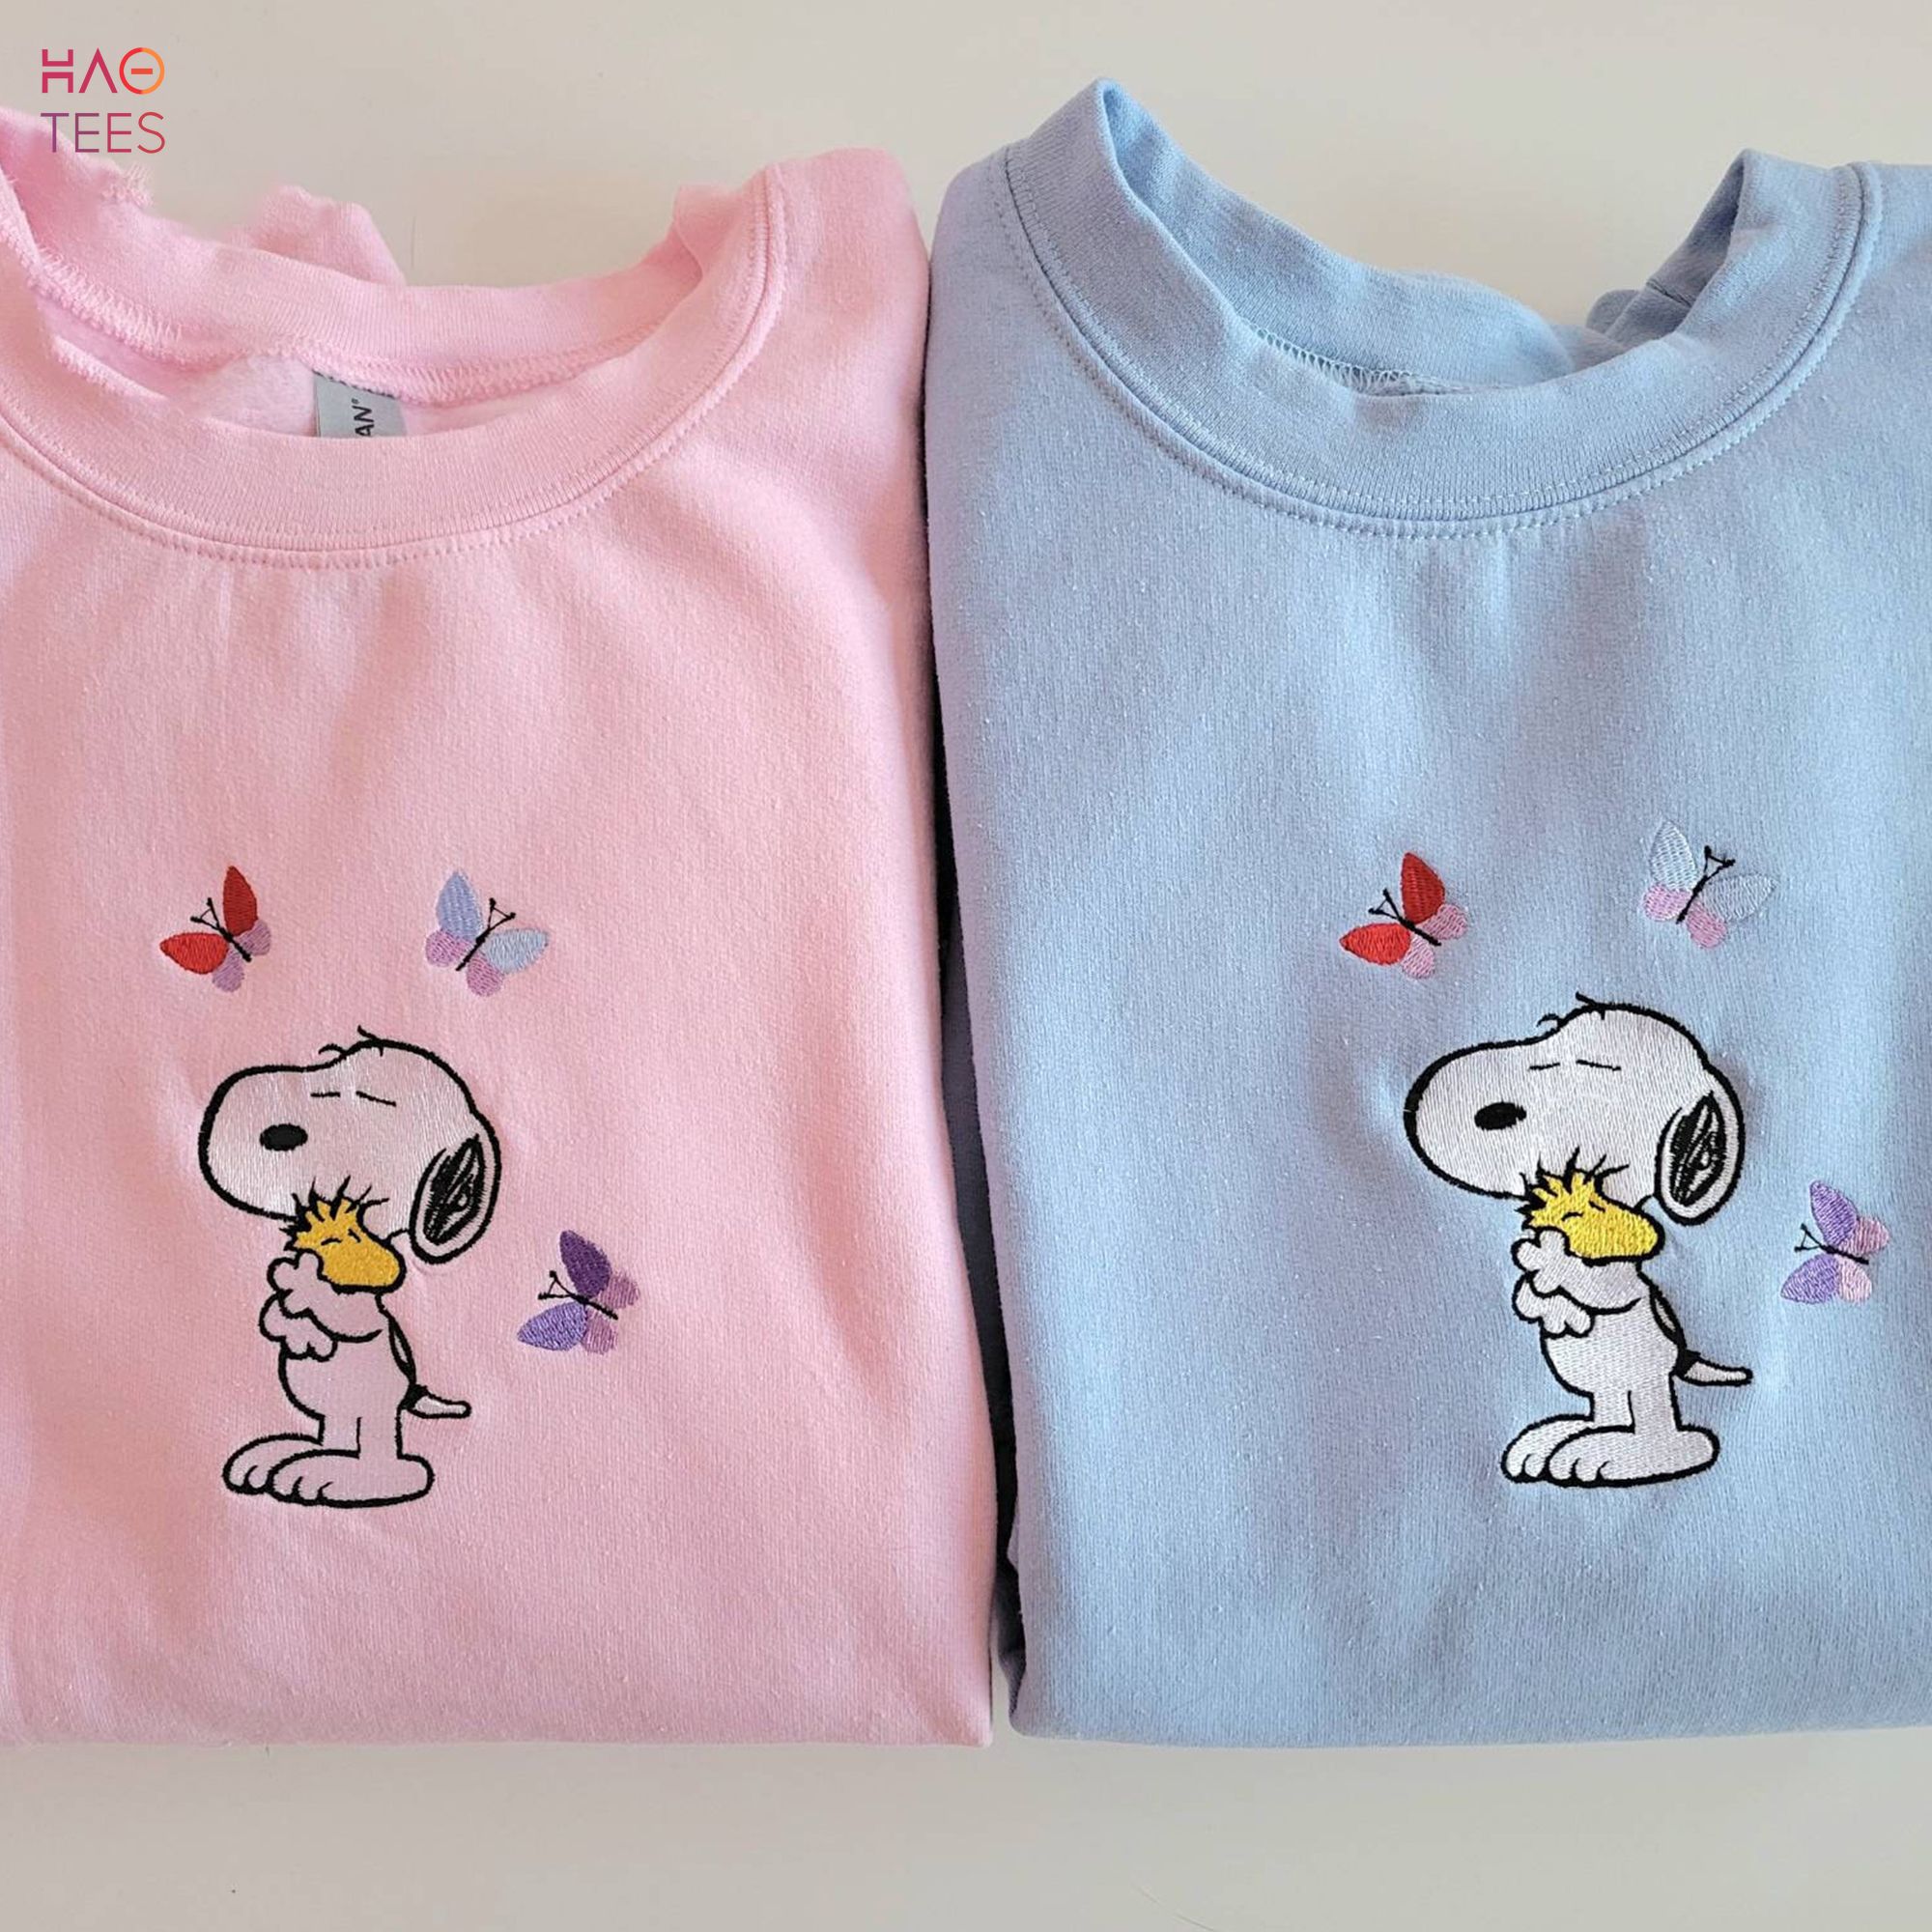 A Warm Embrace Of Snoopy Embroidered Snoopy Womens Snoopy Shirt